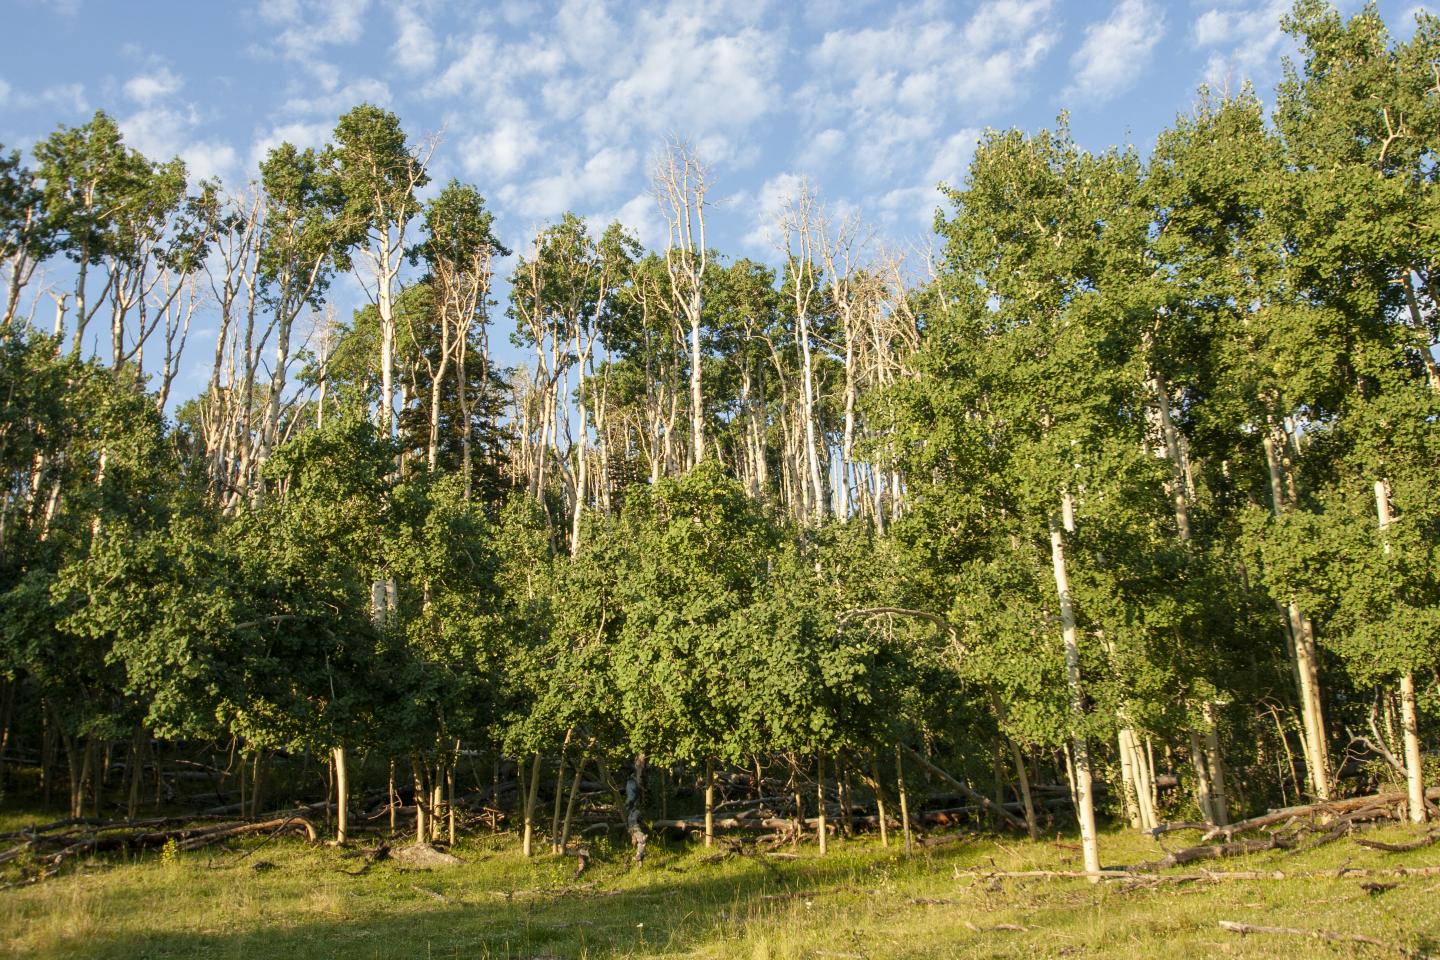 An Aspen Forest that Has Suffered Drought-Induced Dieback